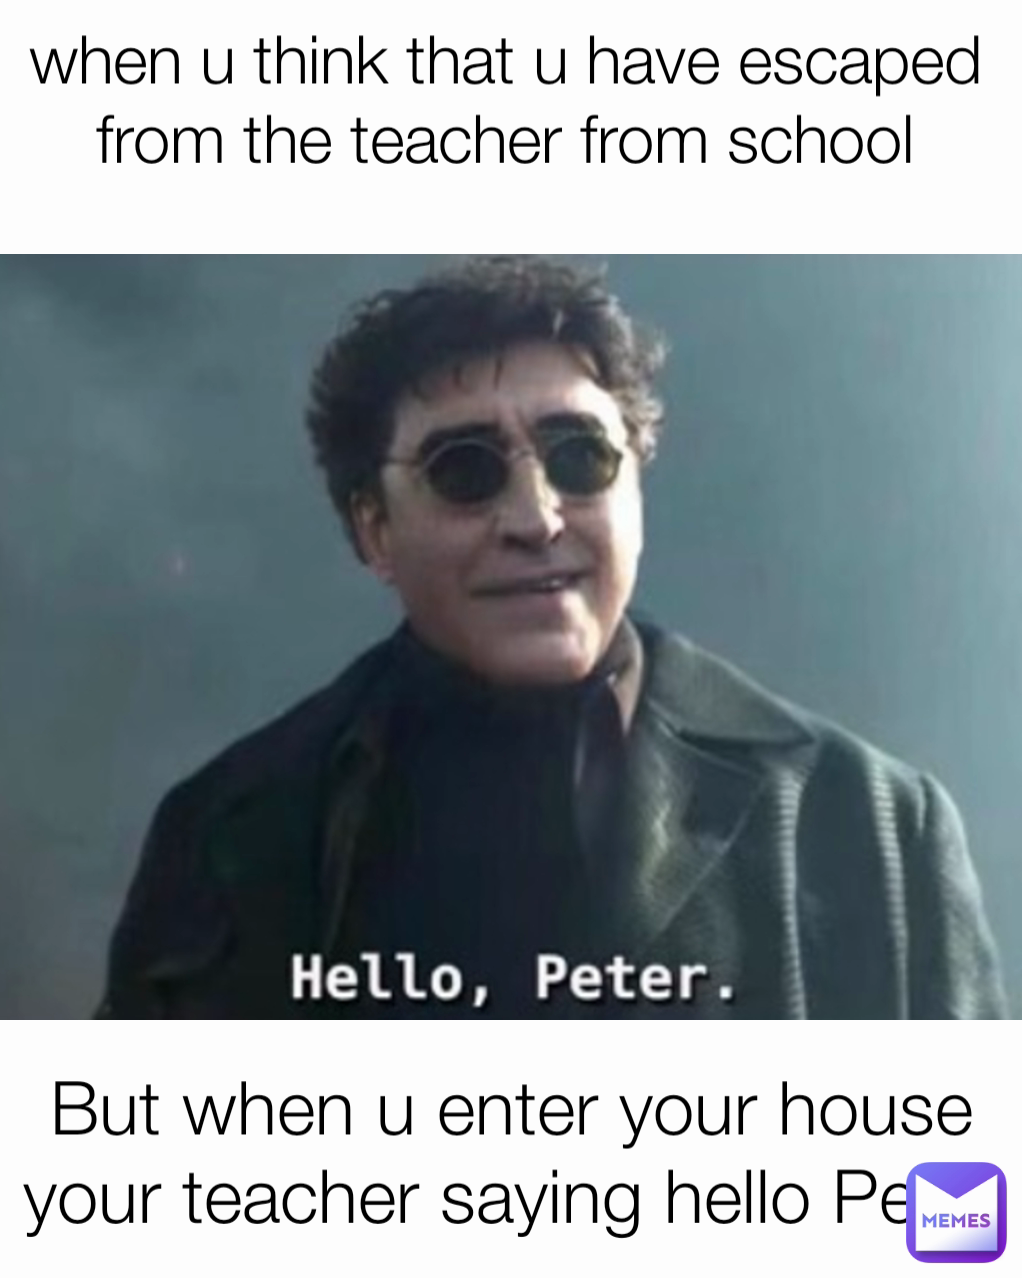 But when u enter your house your teacher saying hello Peter when u think that u have escaped from the teacher from school